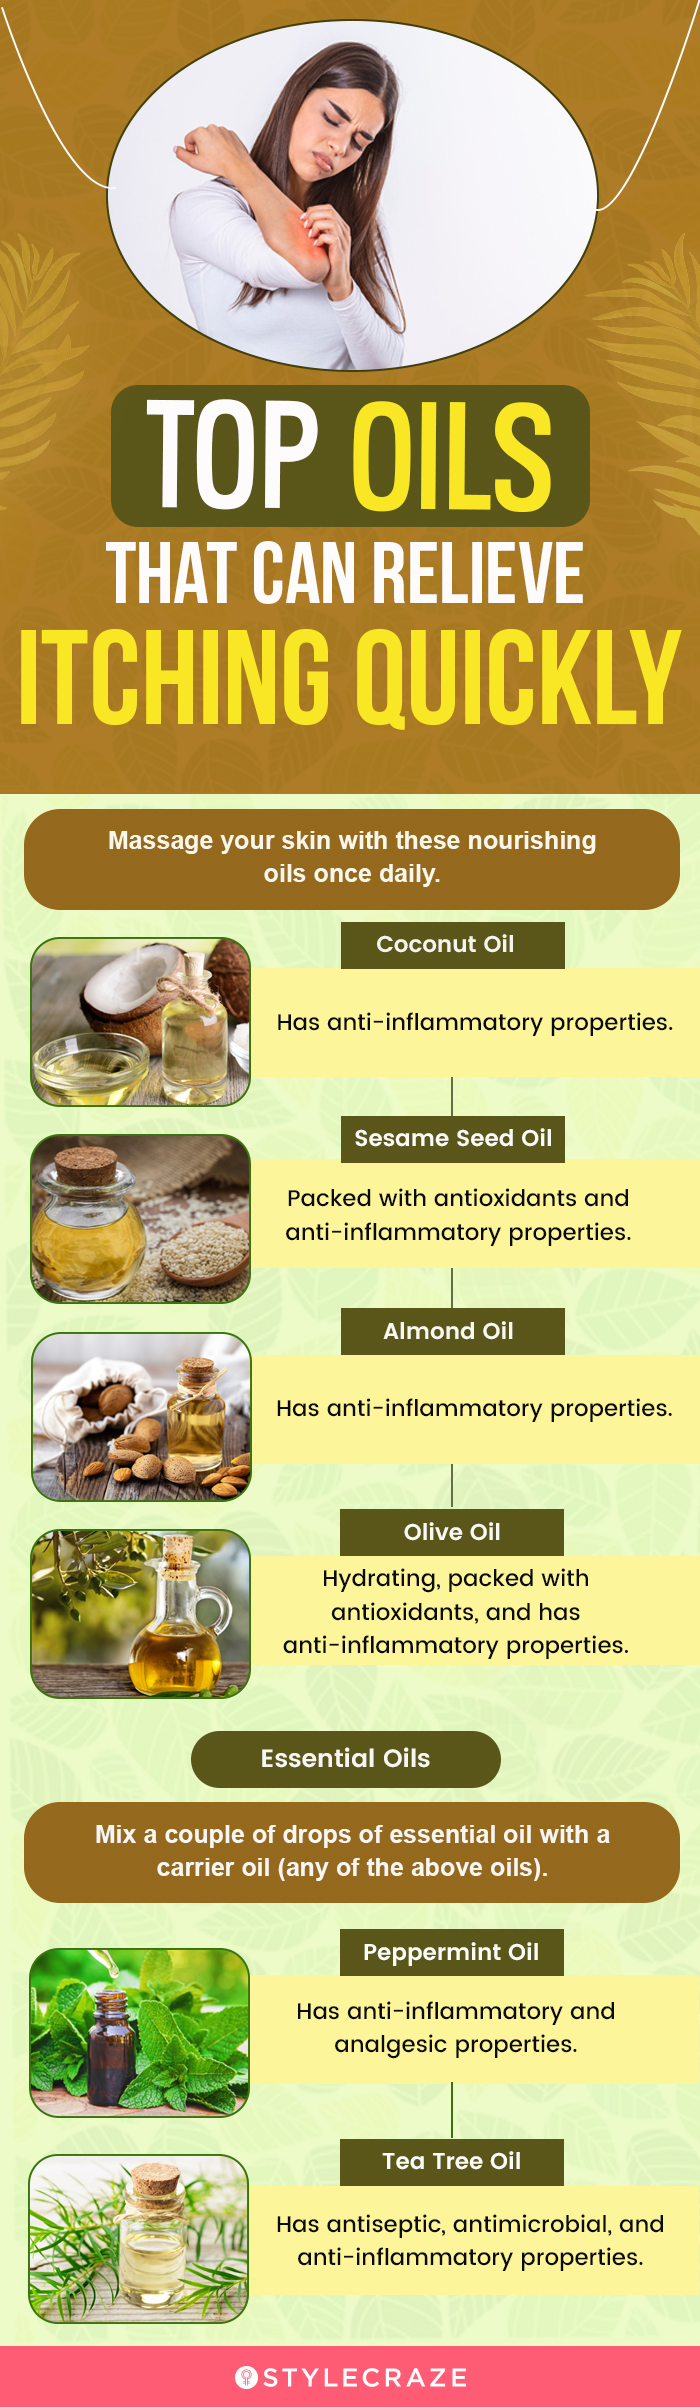 top oils that can relieve your itch quickly (infographic)